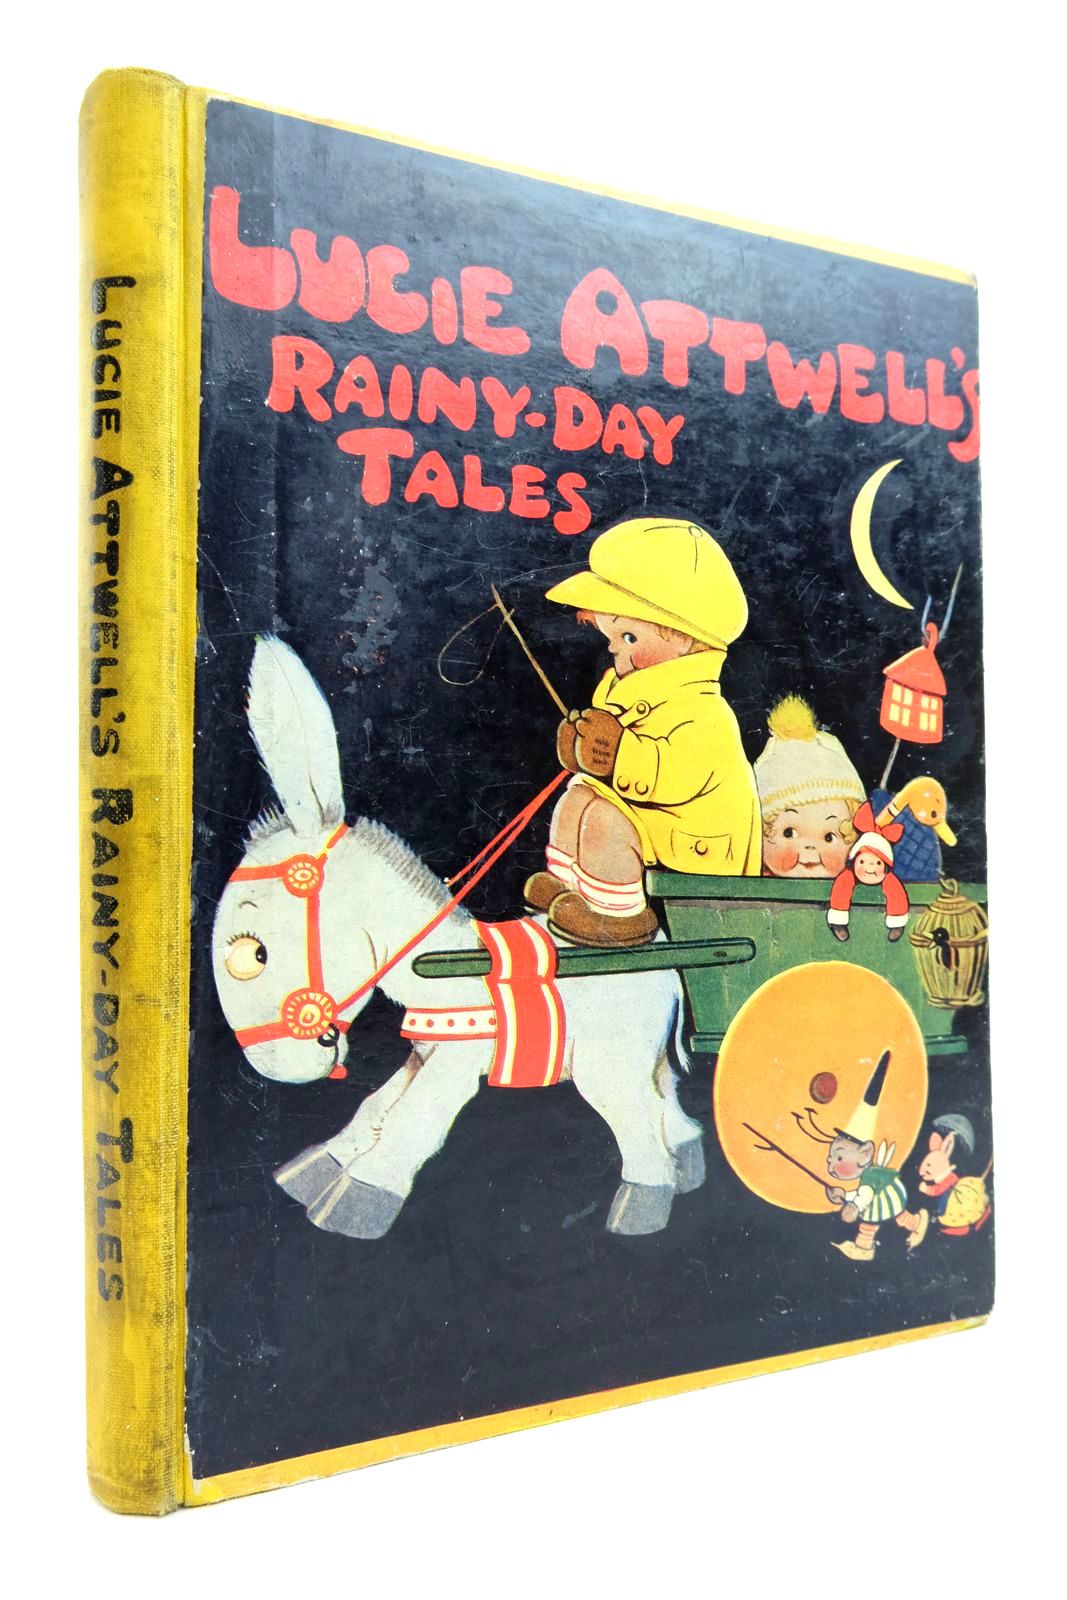 Photo of LUCIE ATTWELL'S RAINY-DAY TALES written by Herbertson, Agnes Grozier Lea, John Rutley, Cecily M. et al, illustrated by Attwell, Mabel Lucie published by S.W. Partridge &amp; Co. Ltd. (STOCK CODE: 2140865)  for sale by Stella & Rose's Books